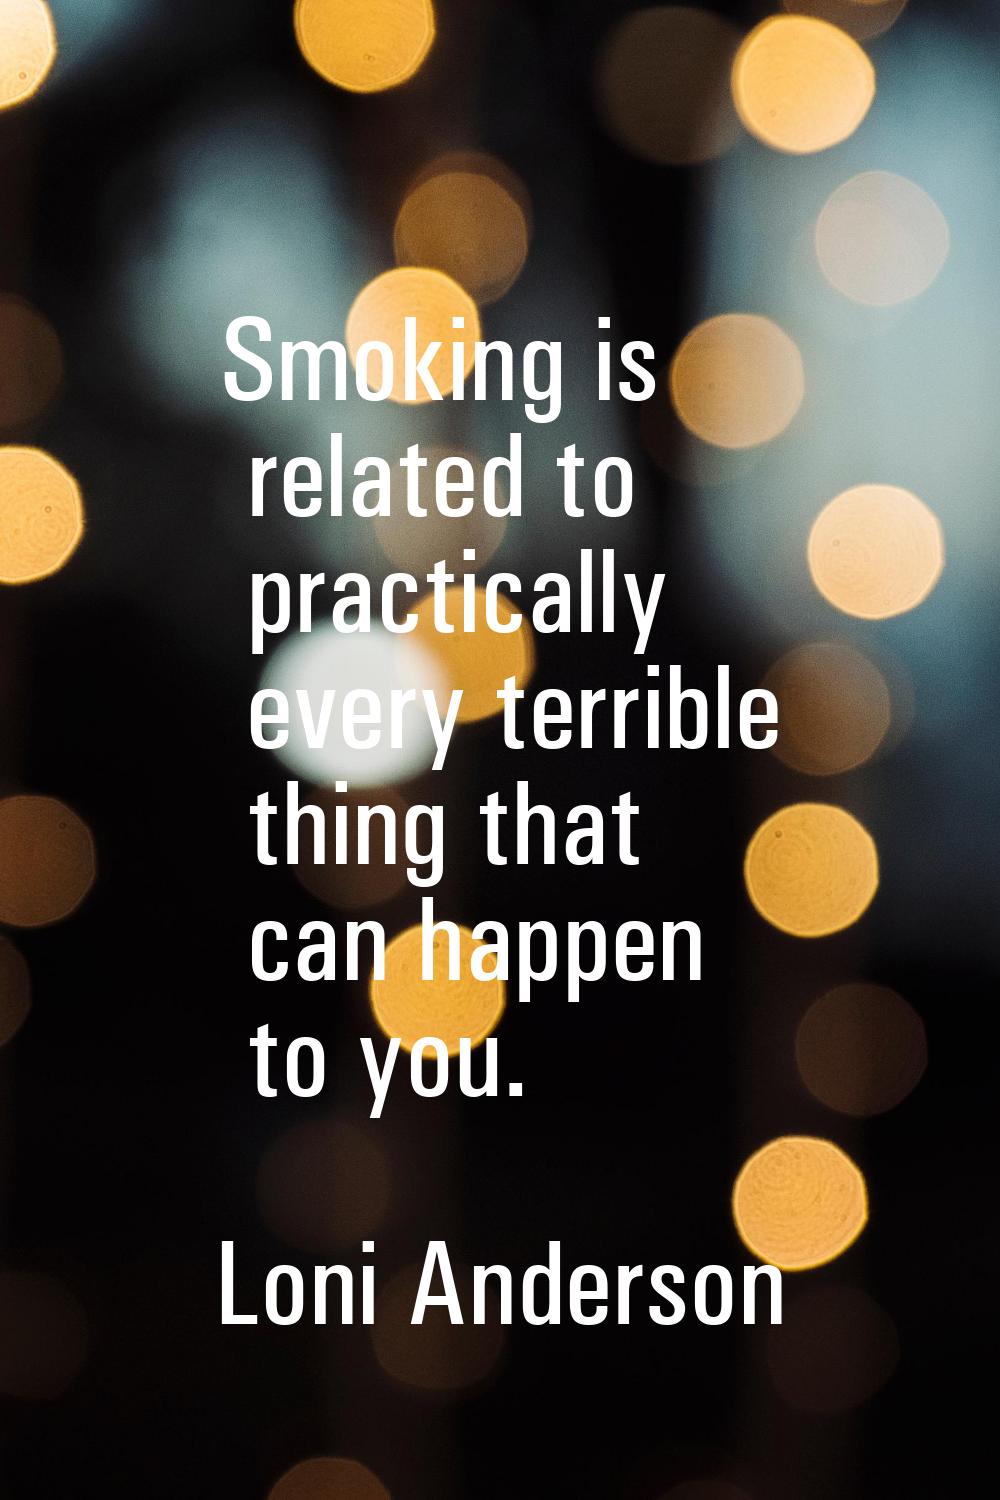 Smoking is related to practically every terrible thing that can happen to you.